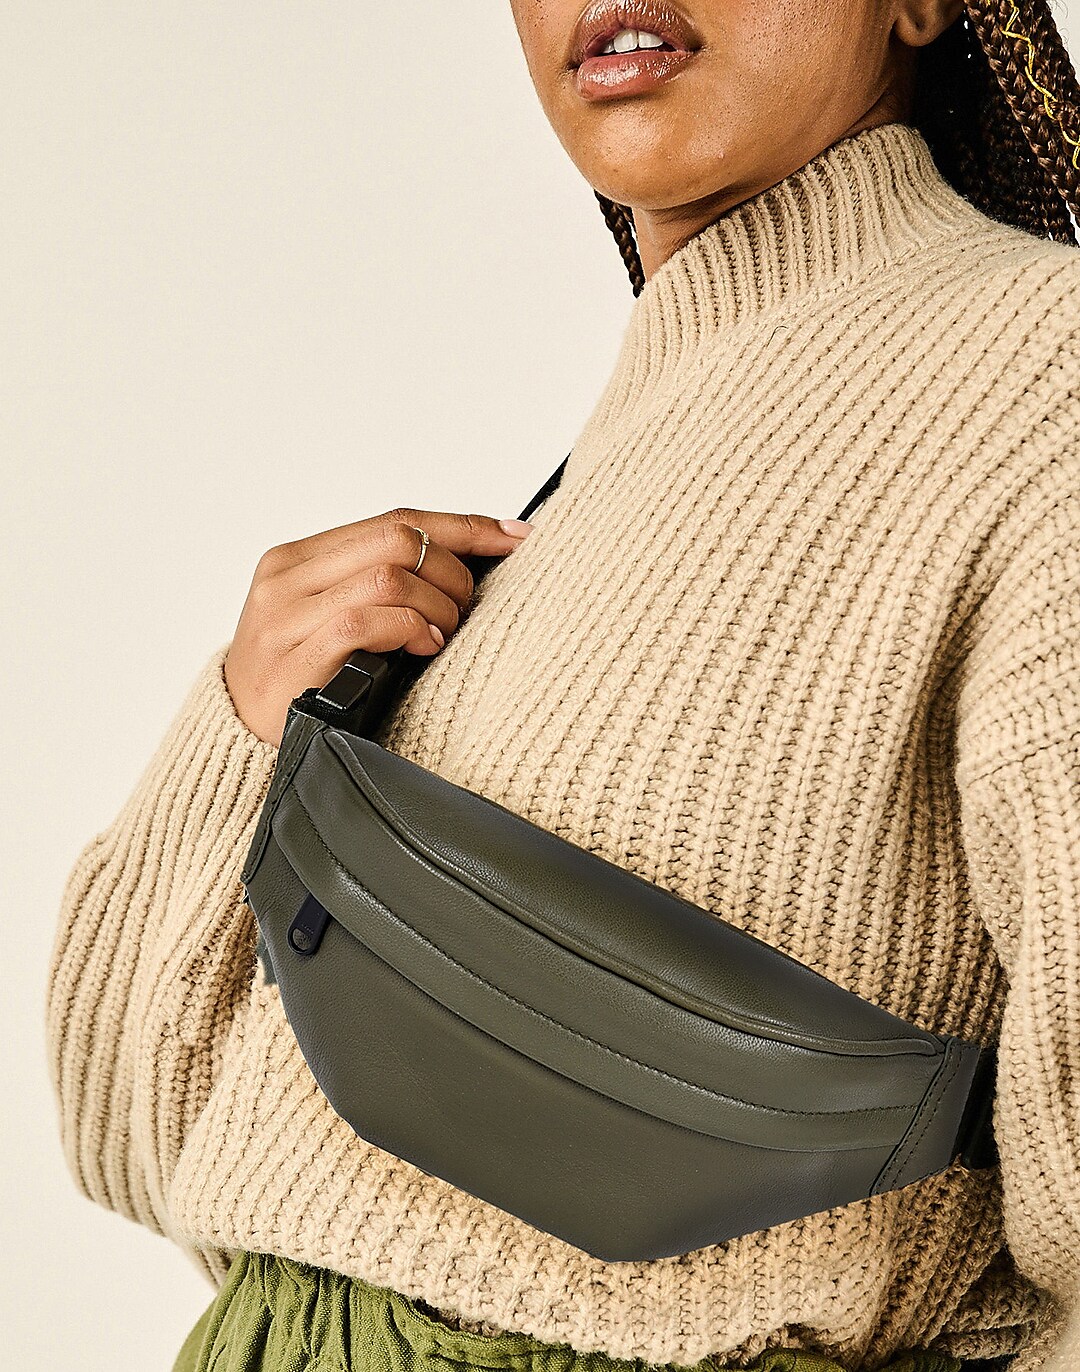 HYER GOODS Upcycled Leather Fanny Pack